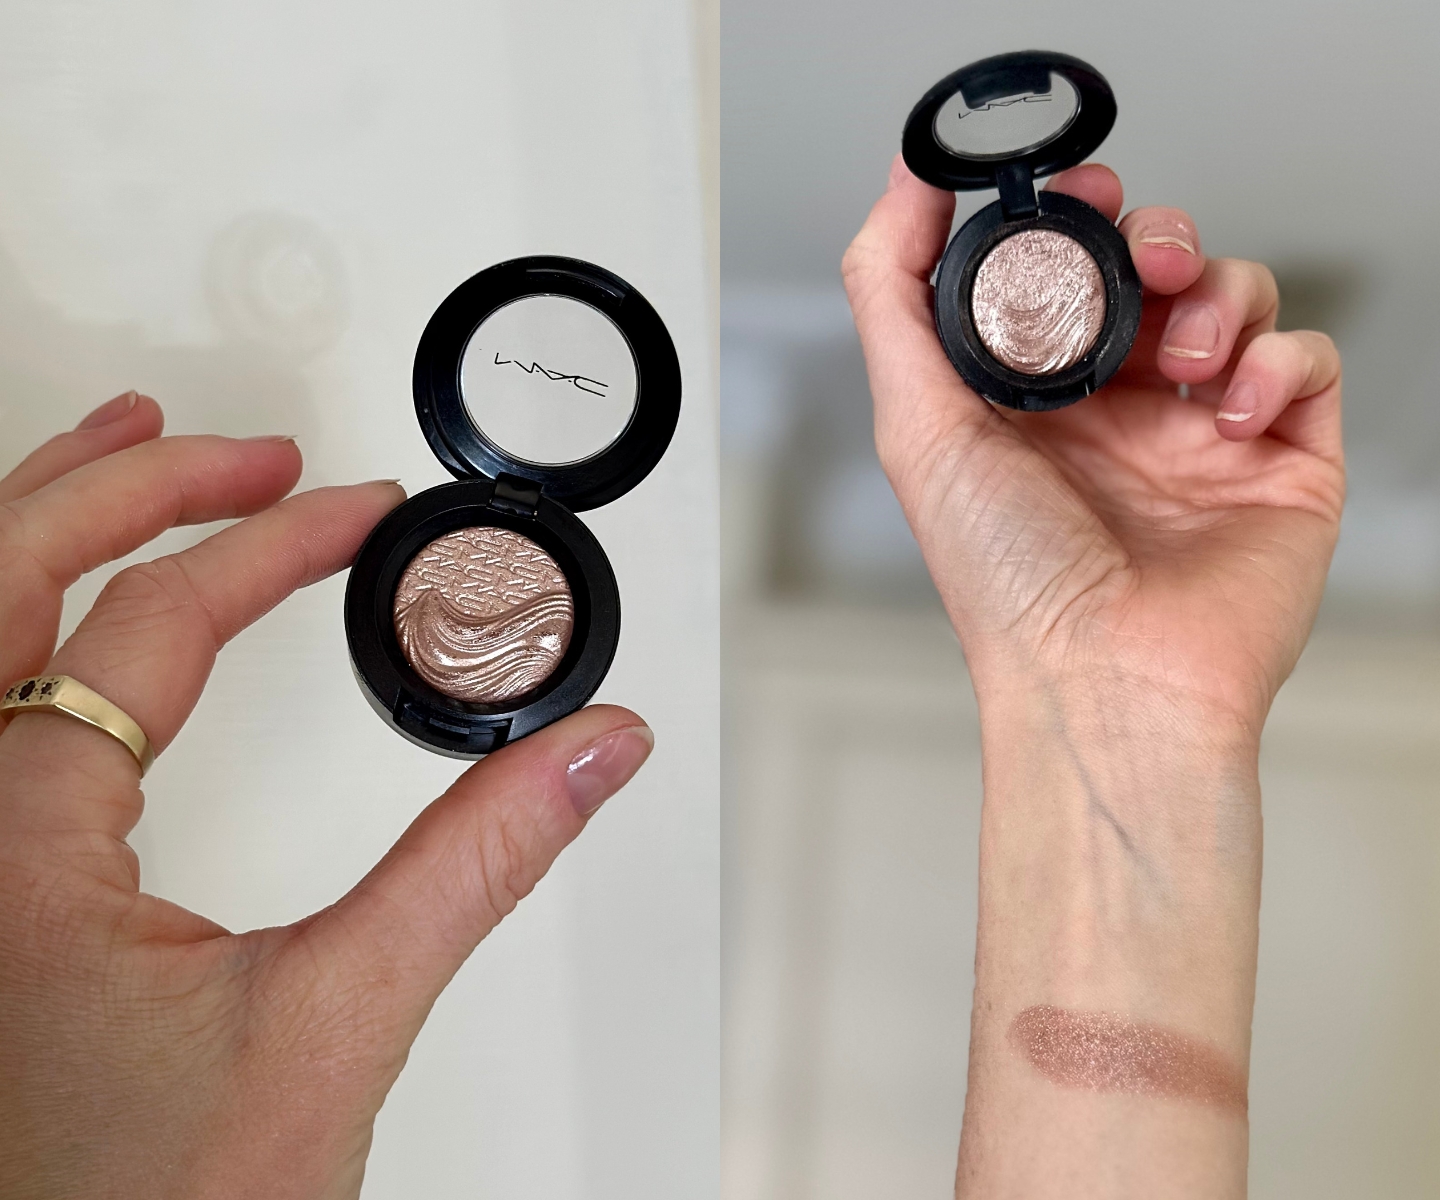 M.A.C Cosmetics Extra Dimension Eye Shadow swatch in-article